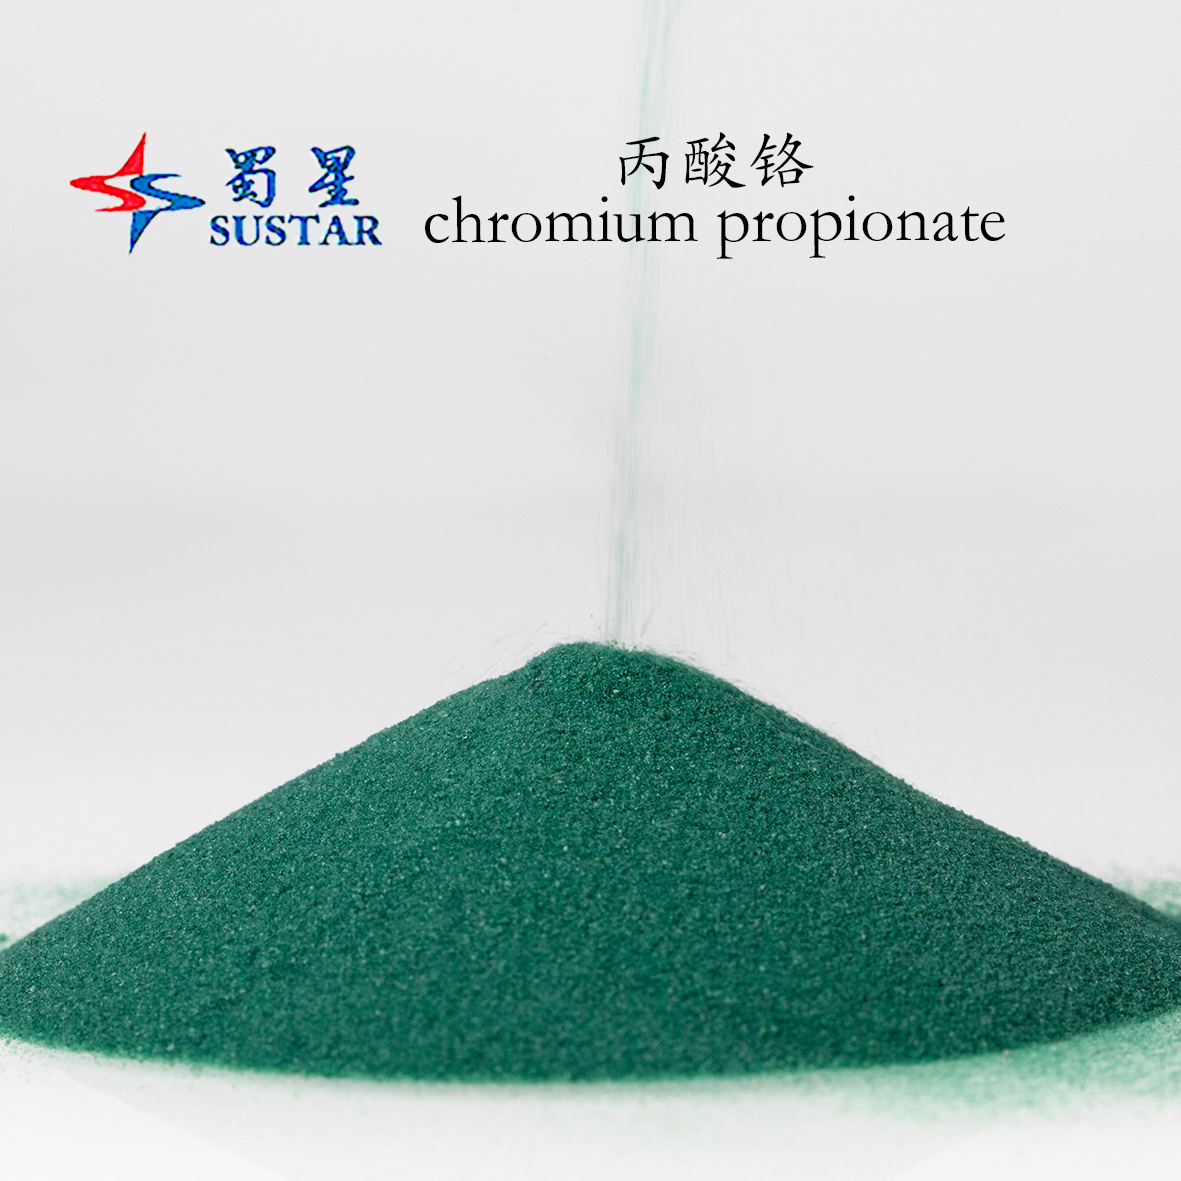 Why Choose Our Sustar: Advantages of Feed Grade Chromium Propionate